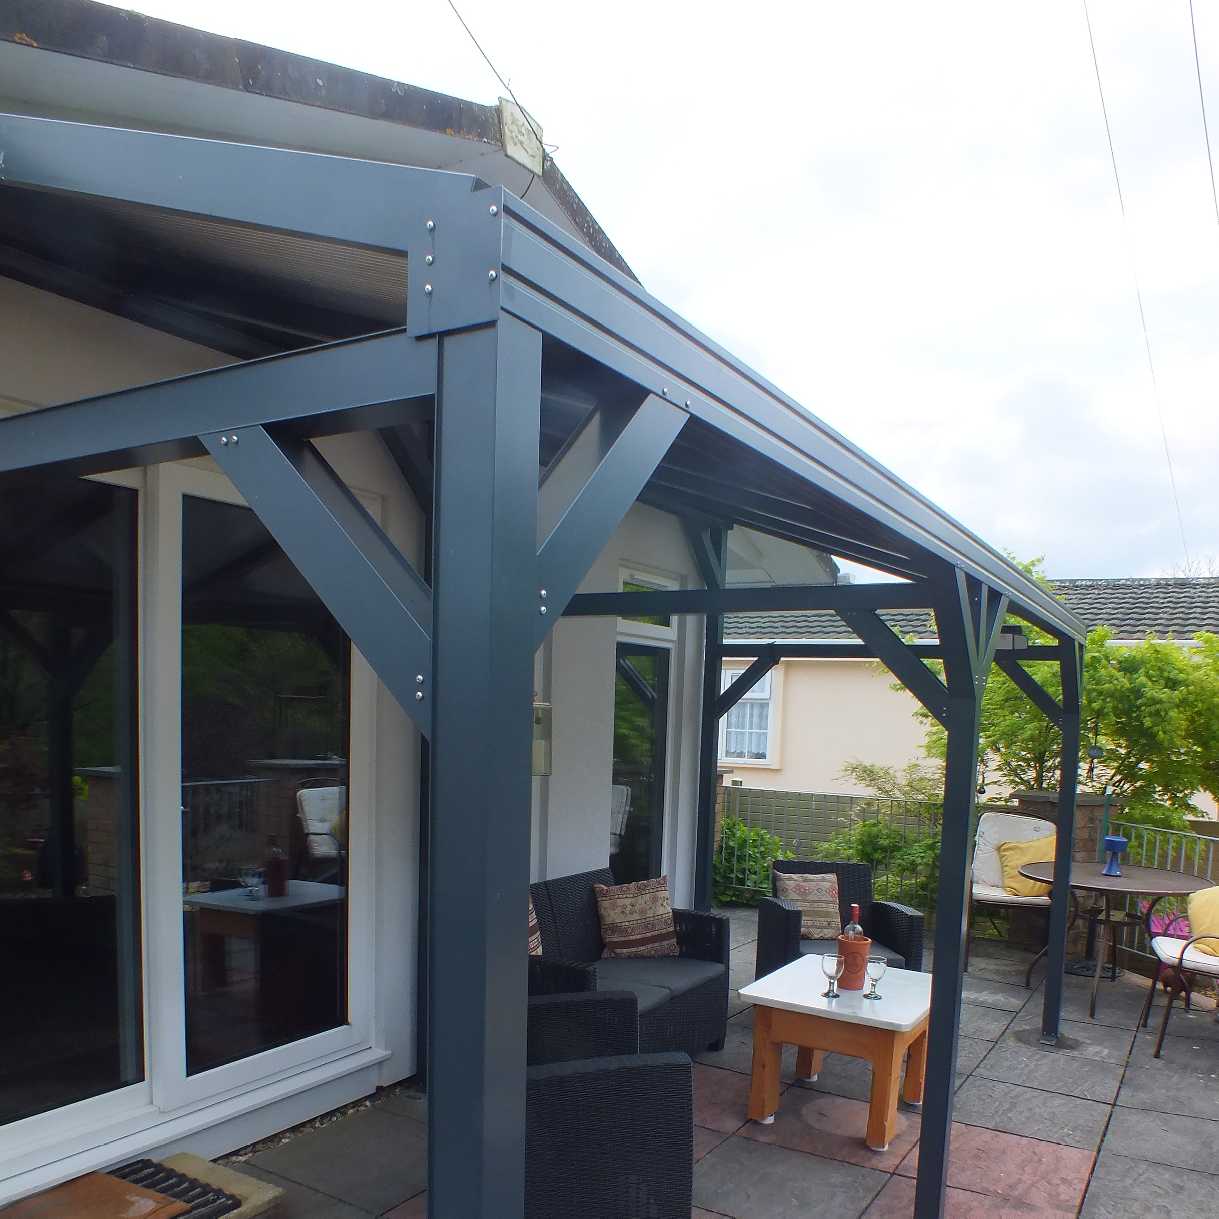 Affordable Omega Smart Free-Standing,Anthracite Grey MonoPitch Roof Canopy with 16mm Polycarbonate Glazing - 4.2m (W) x 2.5m (P), (6) Supporting Posts